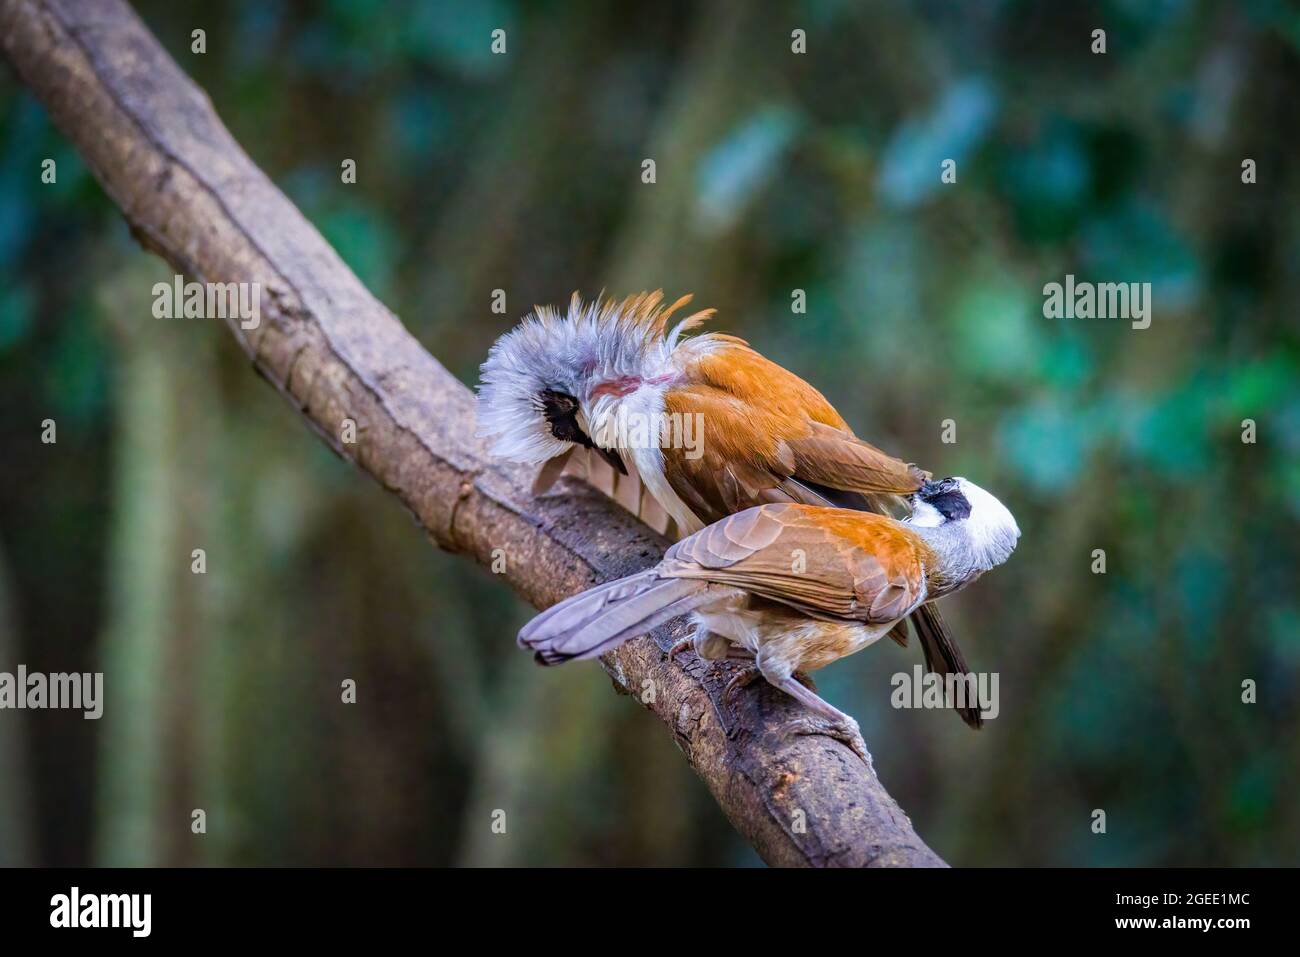 White-crested laughingthrush (Garrulax leucolophus), perched on a wooden log, in the wild Stock Photo